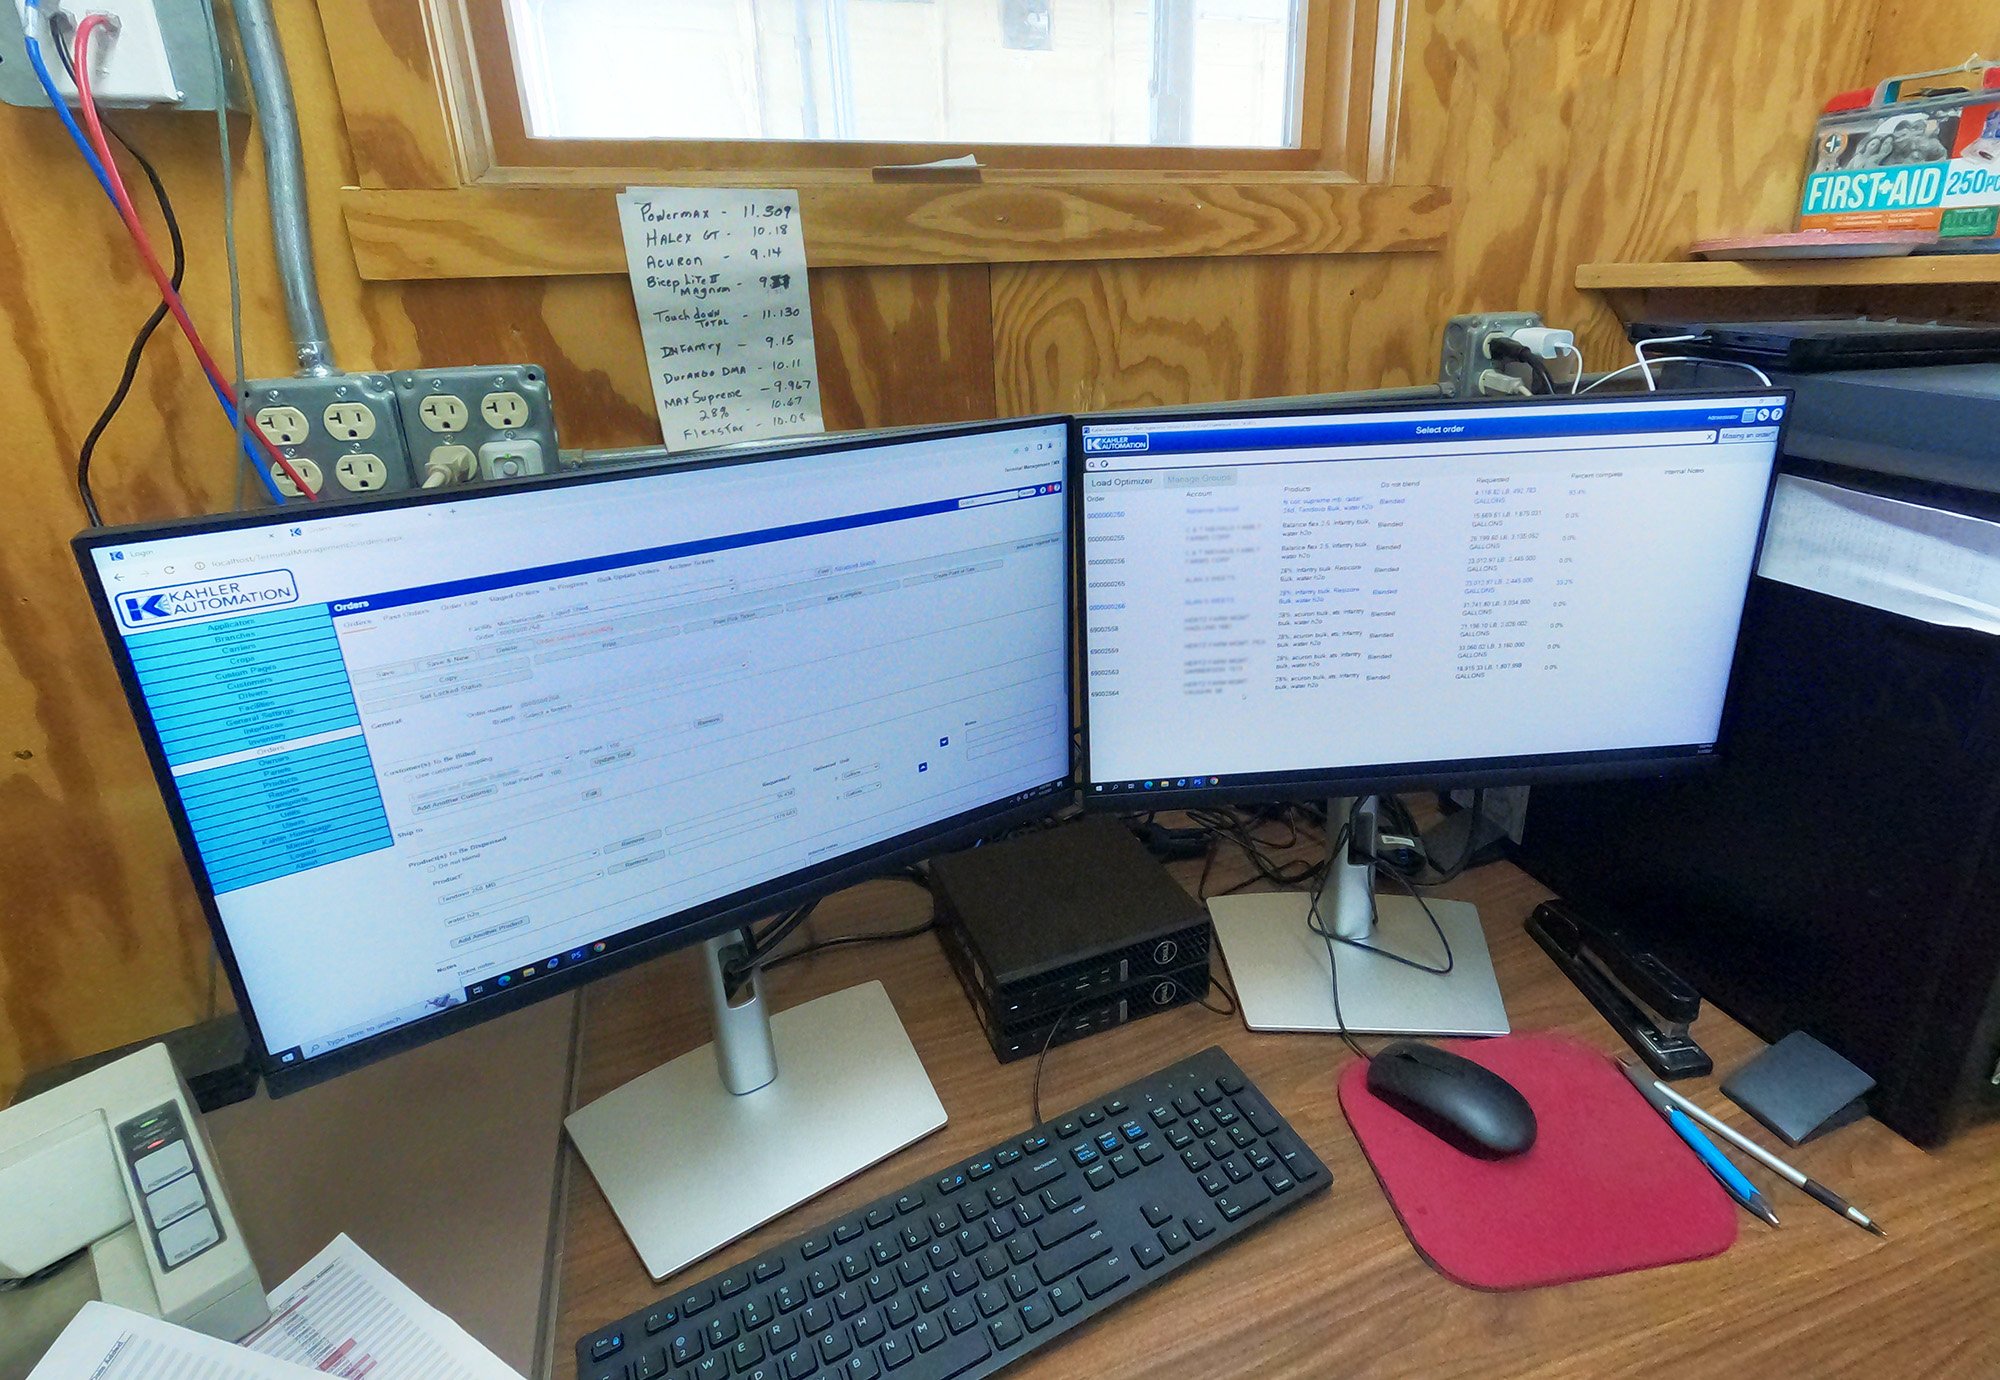  Using Plant Supervisor PSX software within the entire site makes it easy for staff to learn and operate within different areas. 